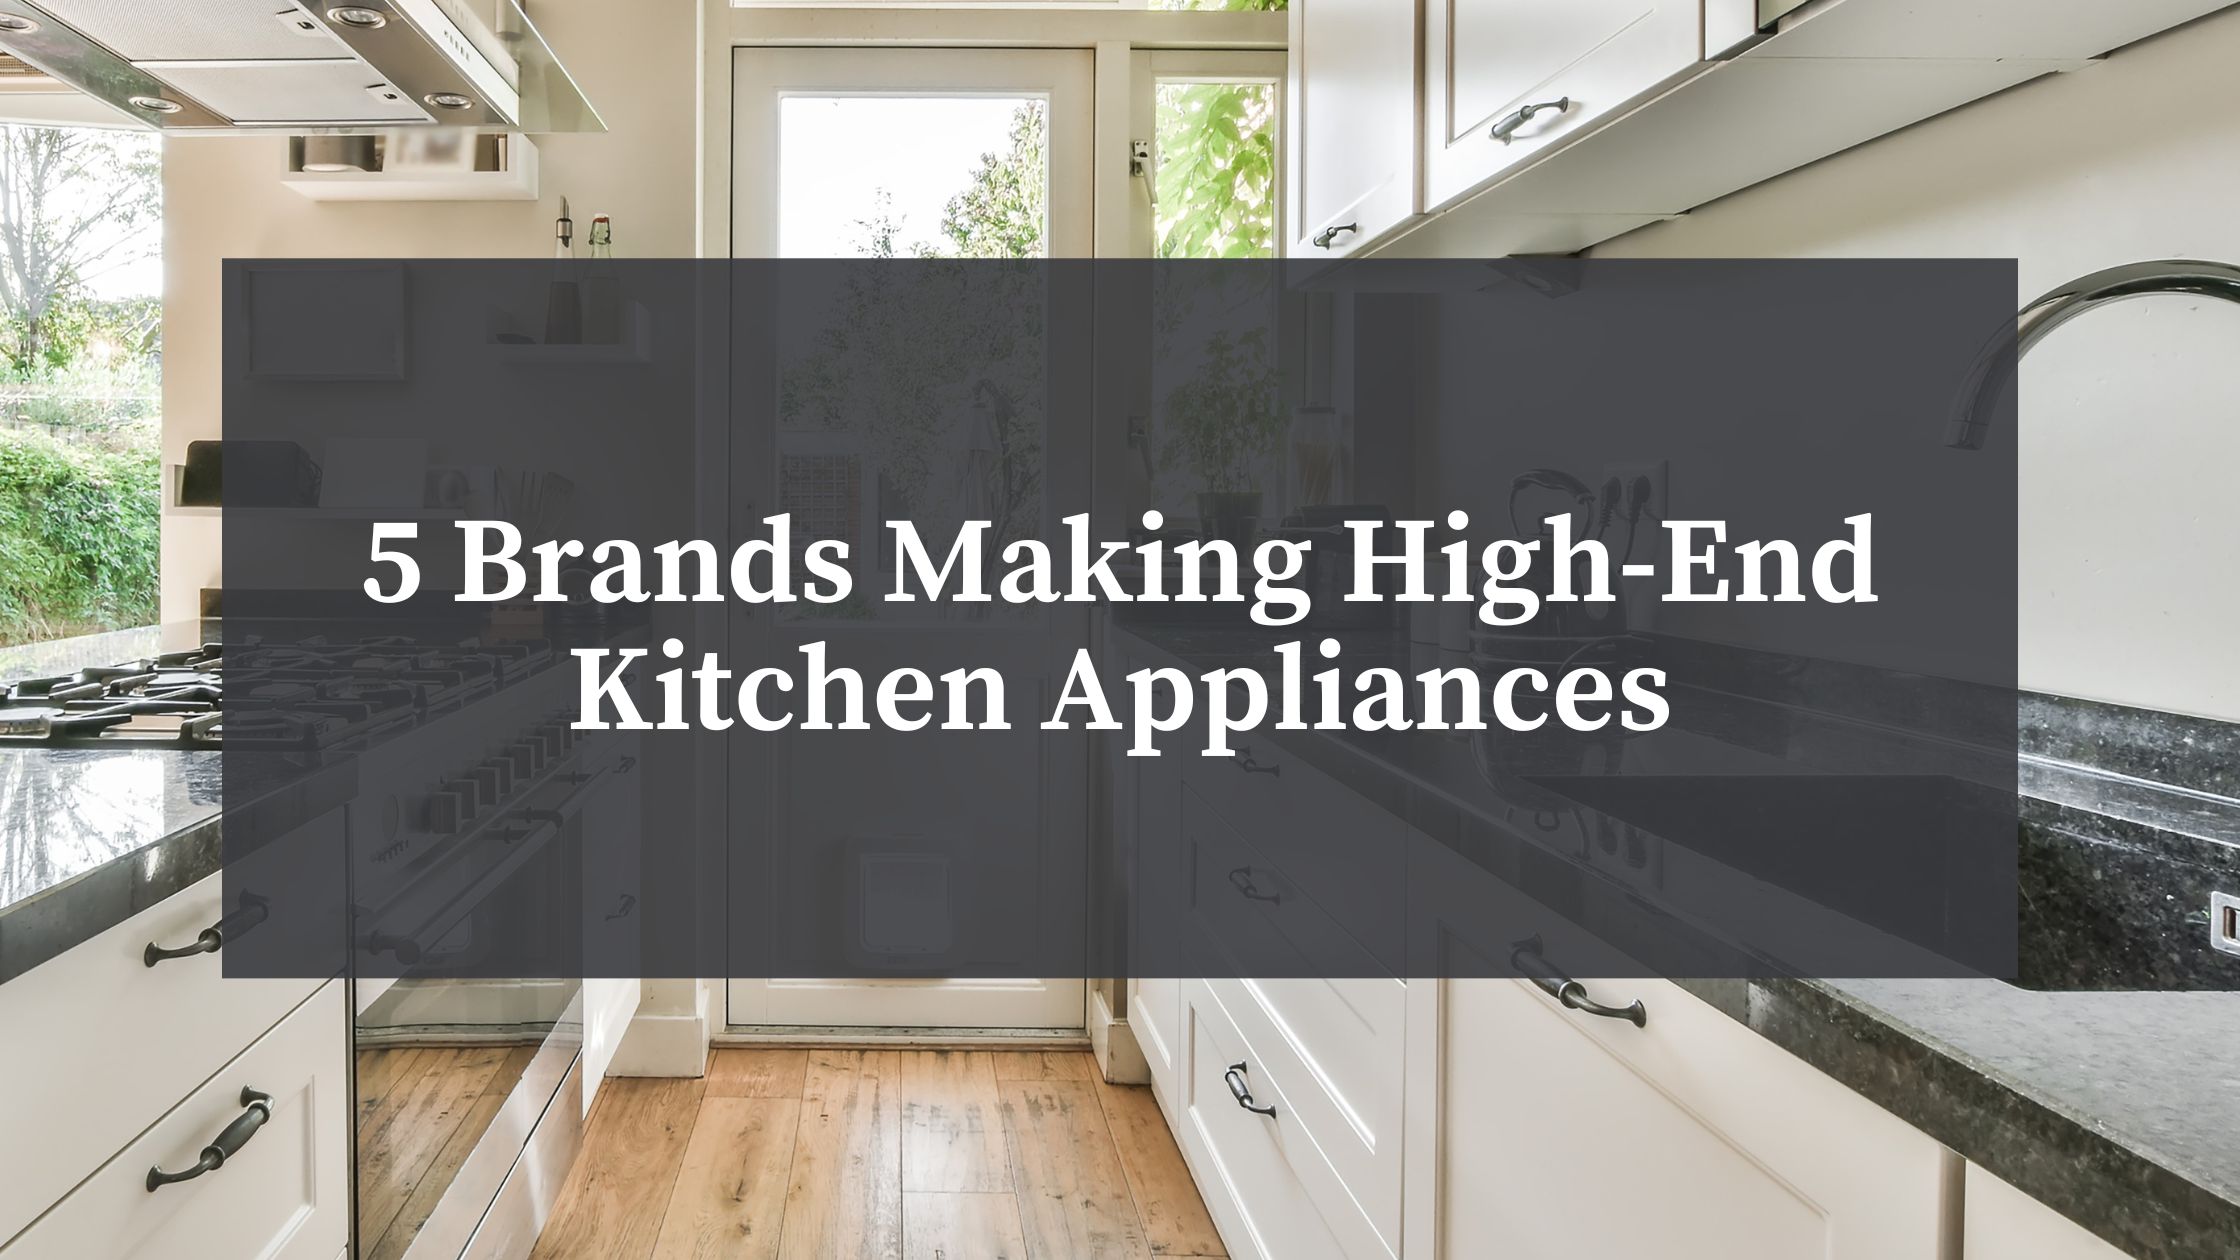 My Top Two Favorite Kitchen Appliances - Haute Off The Rack